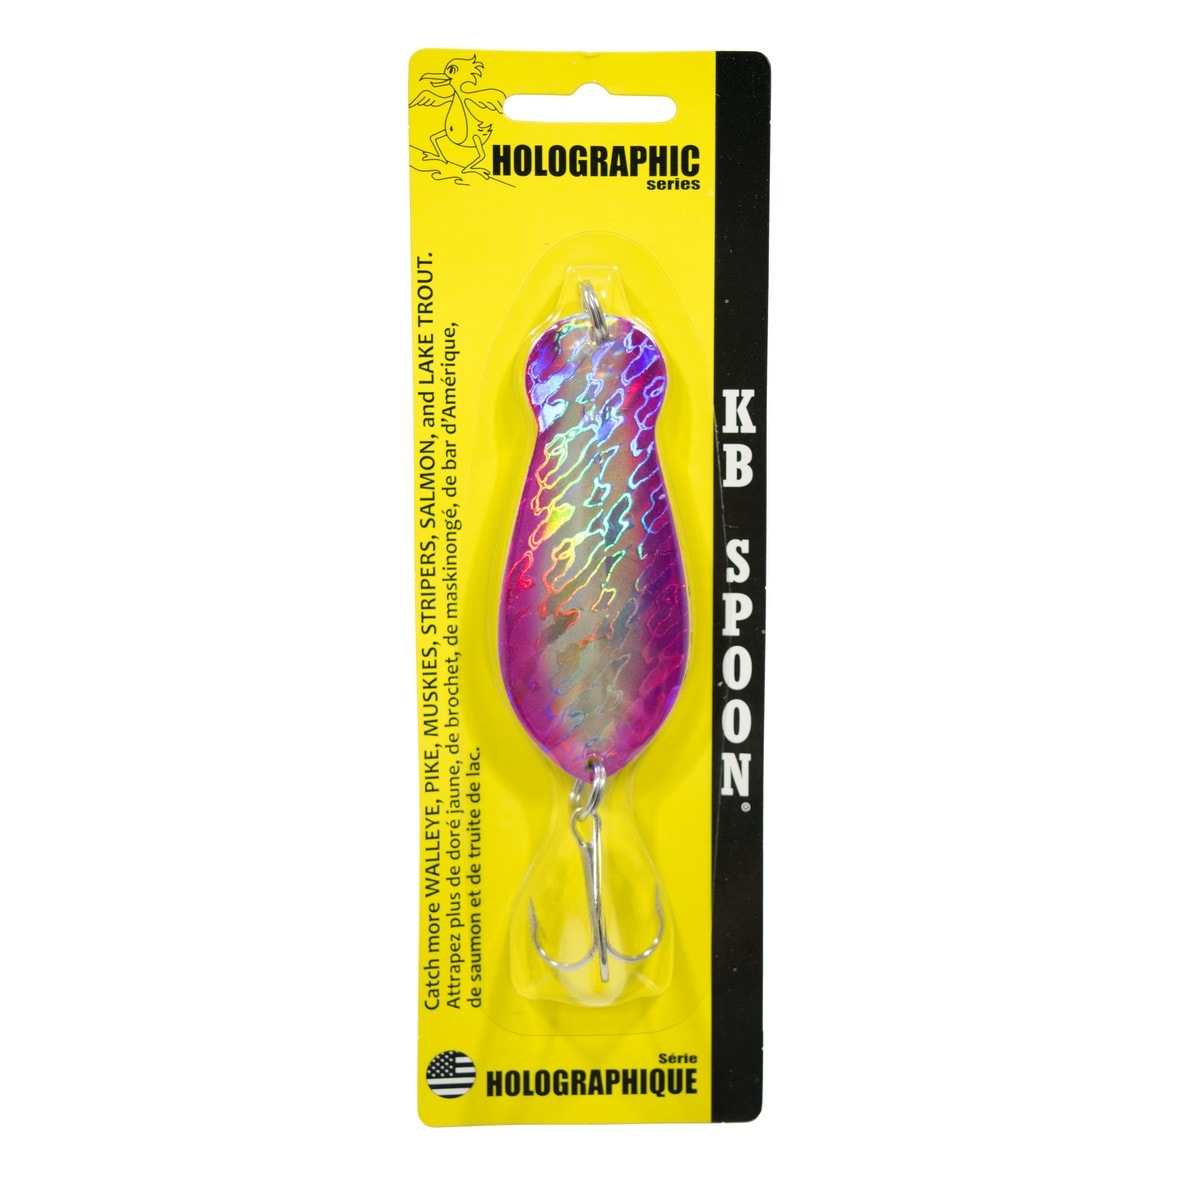 KB Spoon Holographic Series in (310) Pink Lady - Yellow Bird